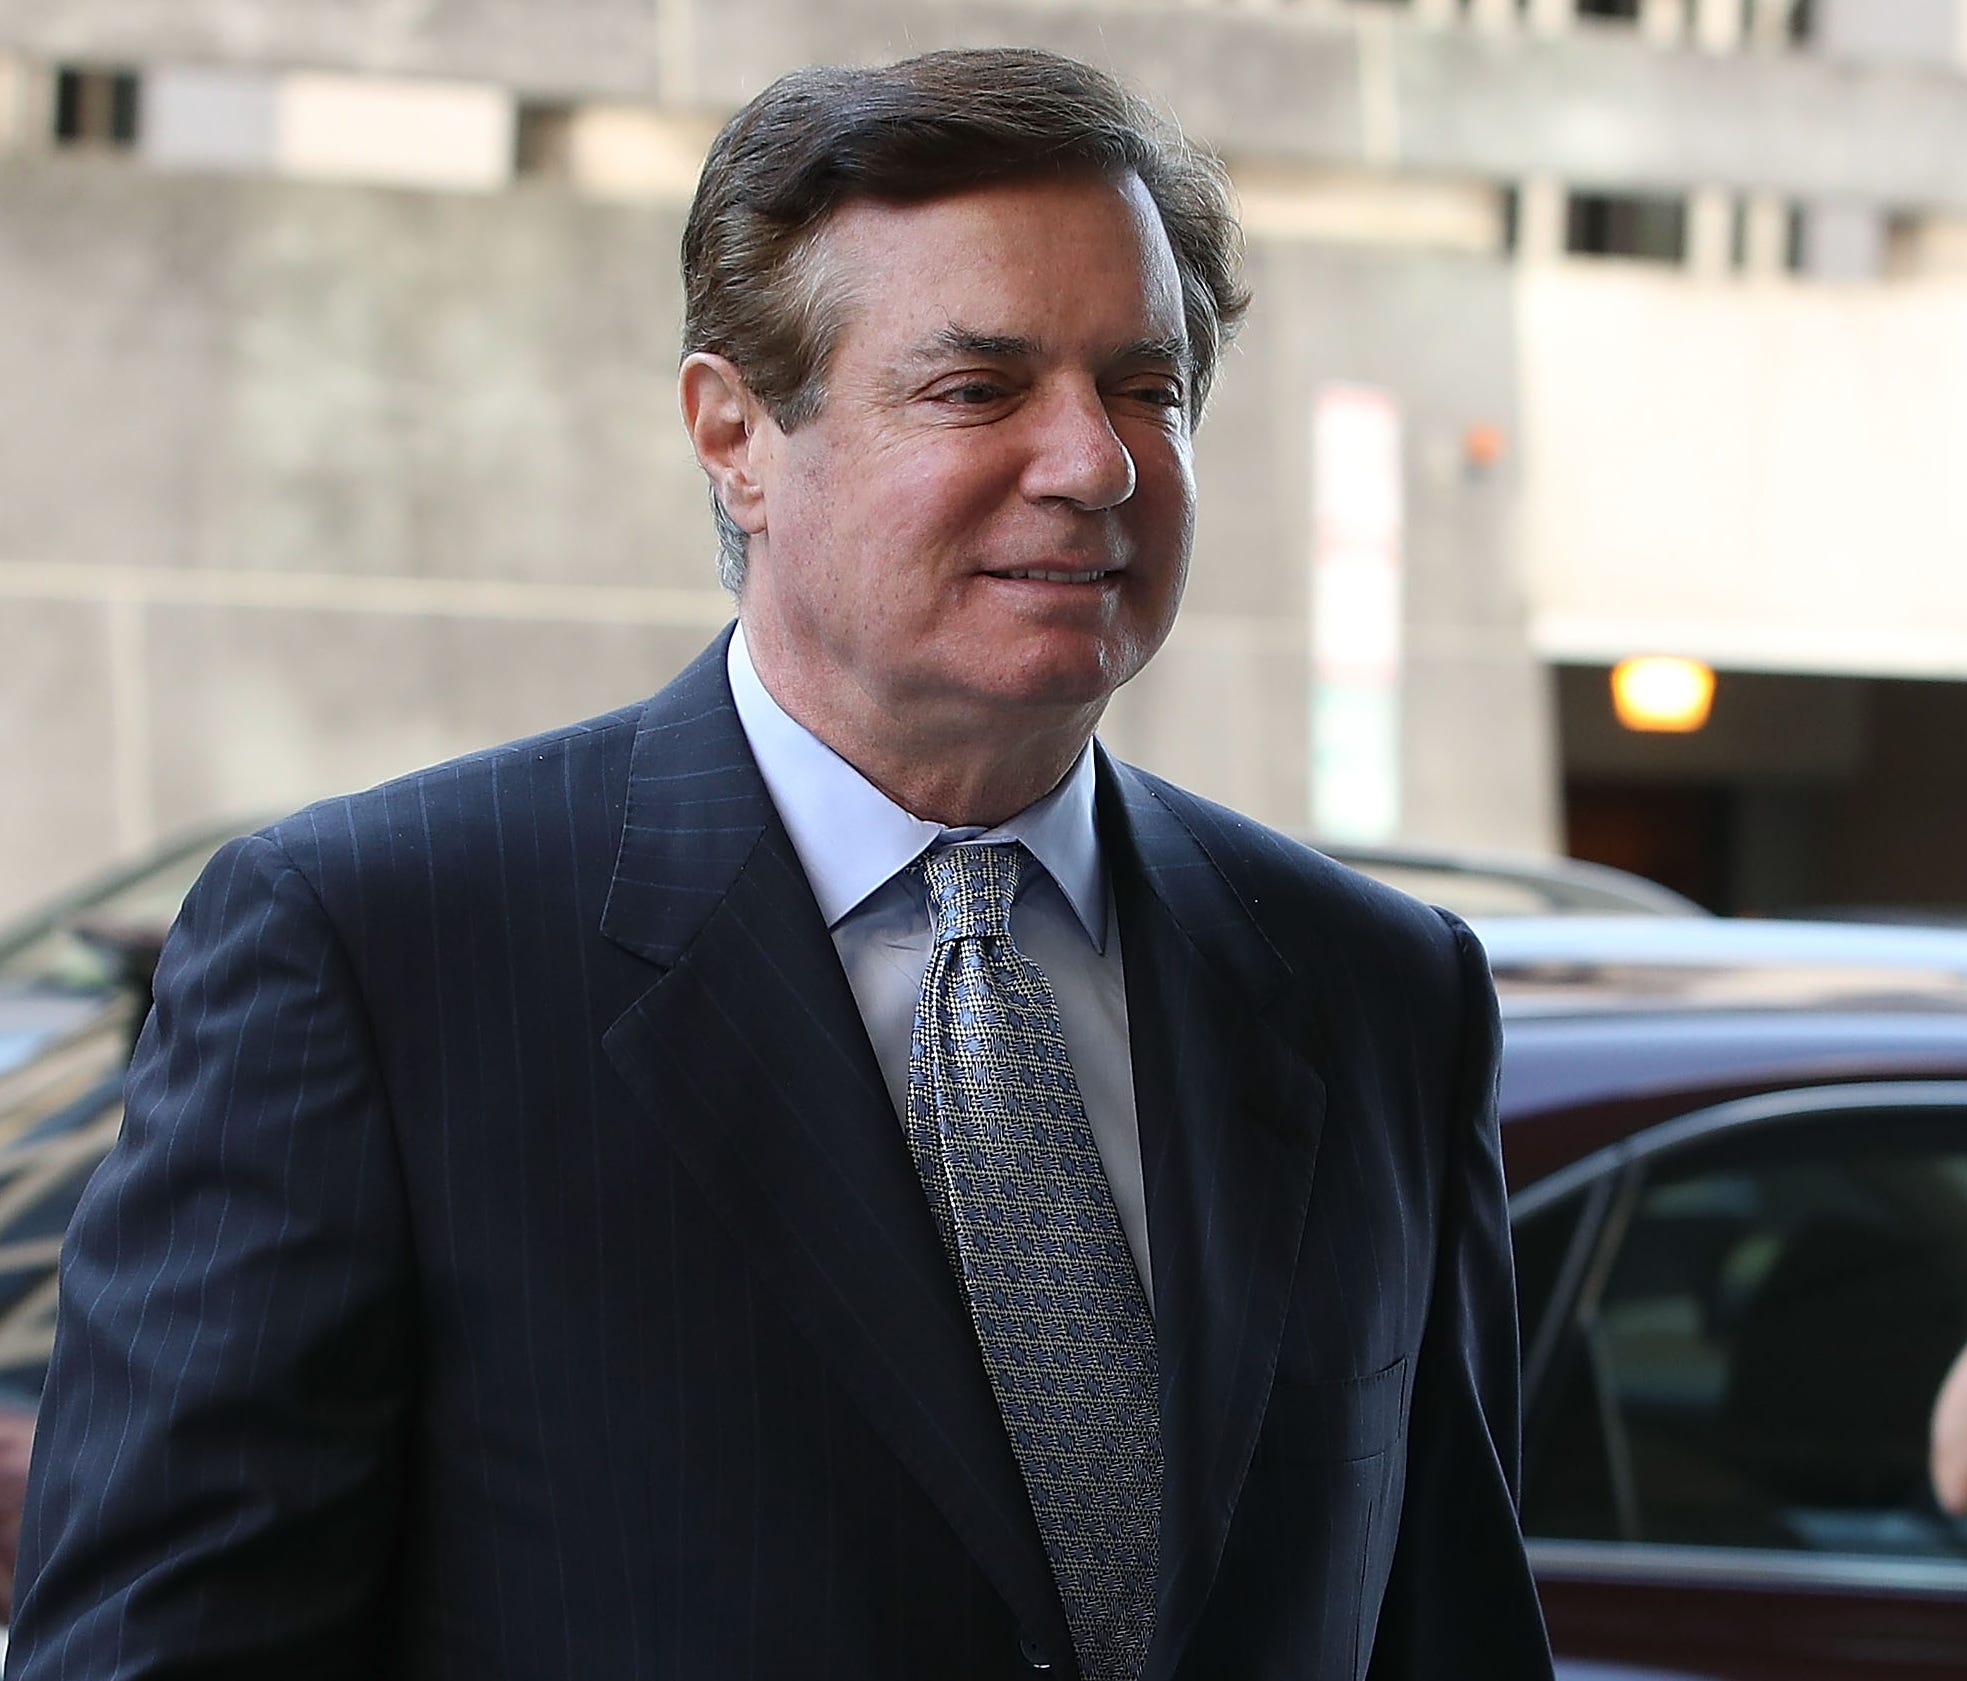 Former Trump campaign manager Paul Manafort arrives for a hearing at the E. Barrett Prettyman U.S. Courthouse in Washington, D.C.